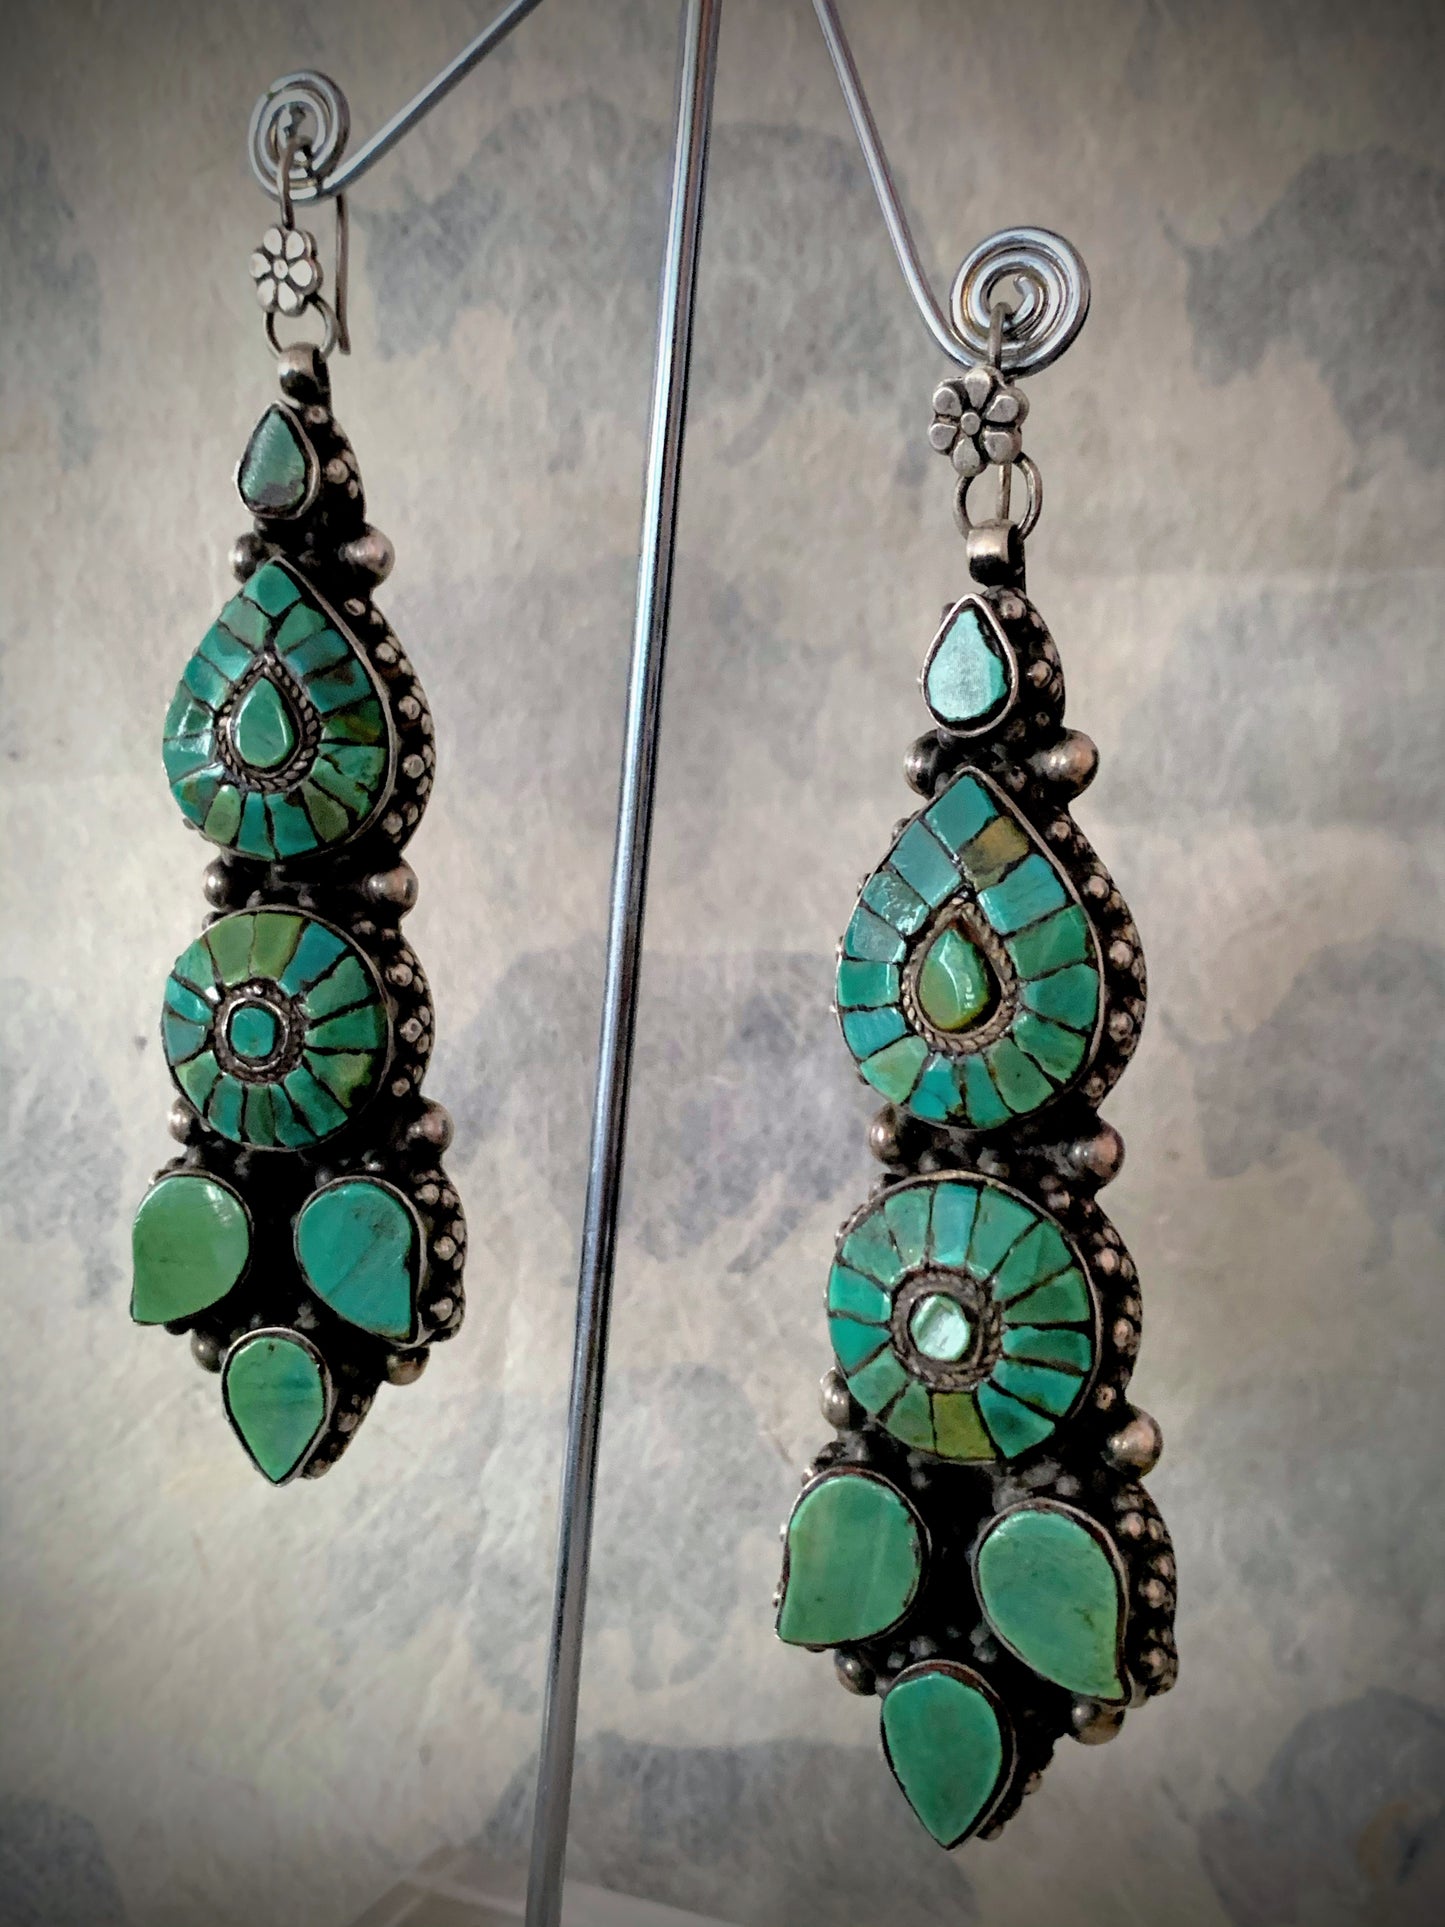 Vintage Tibetan turquoise and silver ear rings